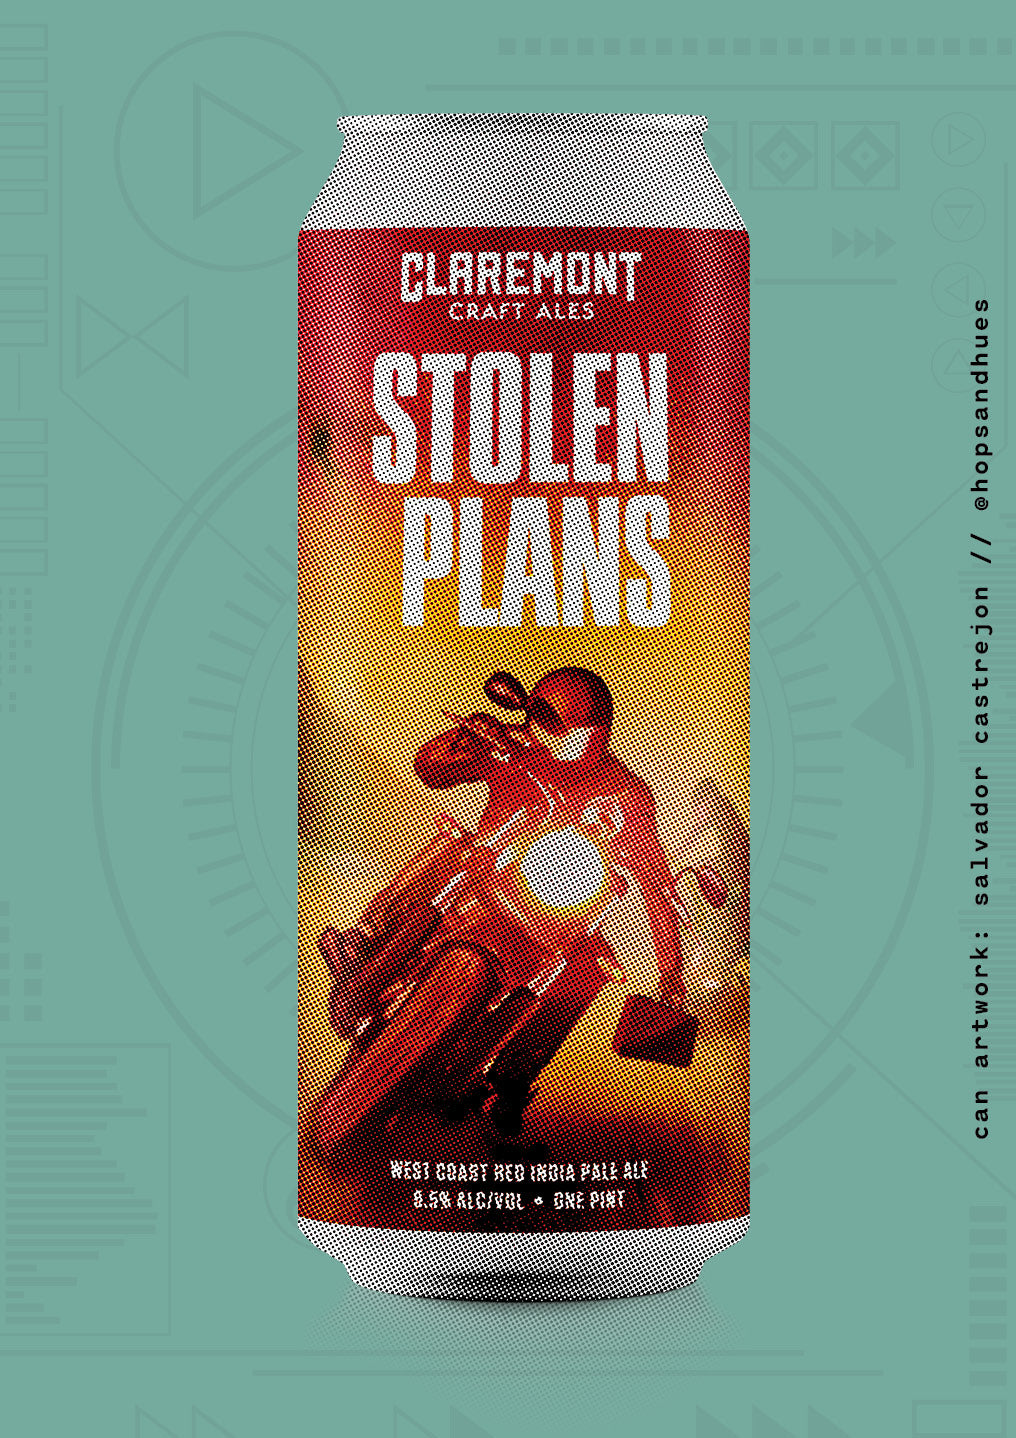 Stolen Plans by Claremont Craft Ales from Claremont, CA